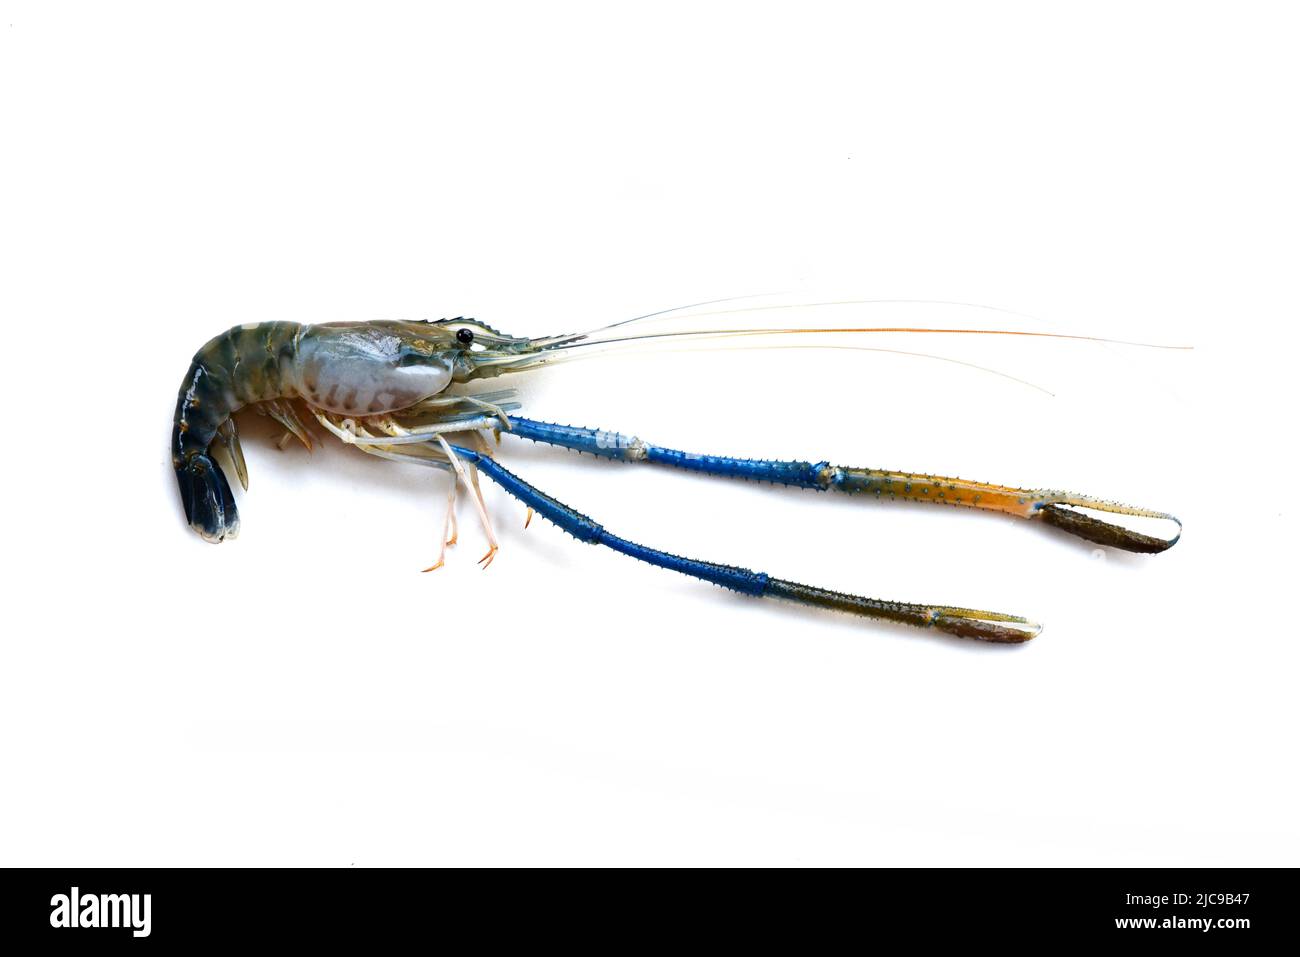 A big fresh river prawn are ready for cooking,to tom Yum Goong,on the White Blackground. Stock Photo